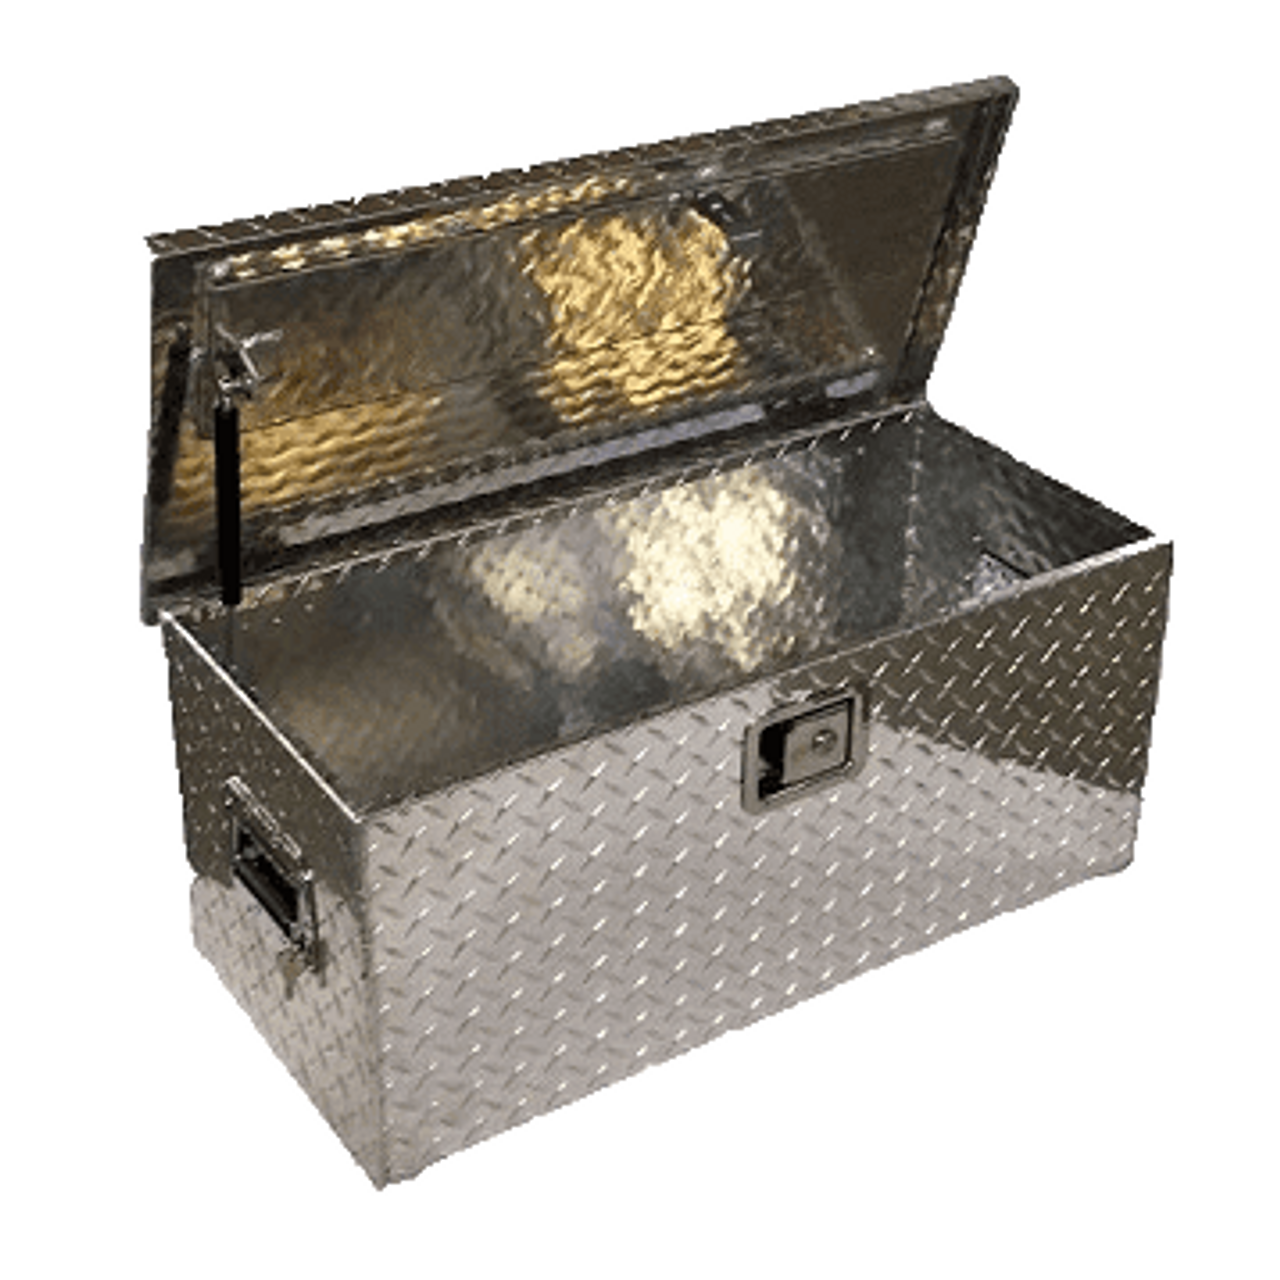 https://cdn11.bigcommerce.com/s-7k4n21ibmh/images/stencil/1280x1280/products/25144/118473/universal-diamond-plate-aluminum-large-tool-box-by-hornet-outdoors-46__39884.1627017620.png?c=1